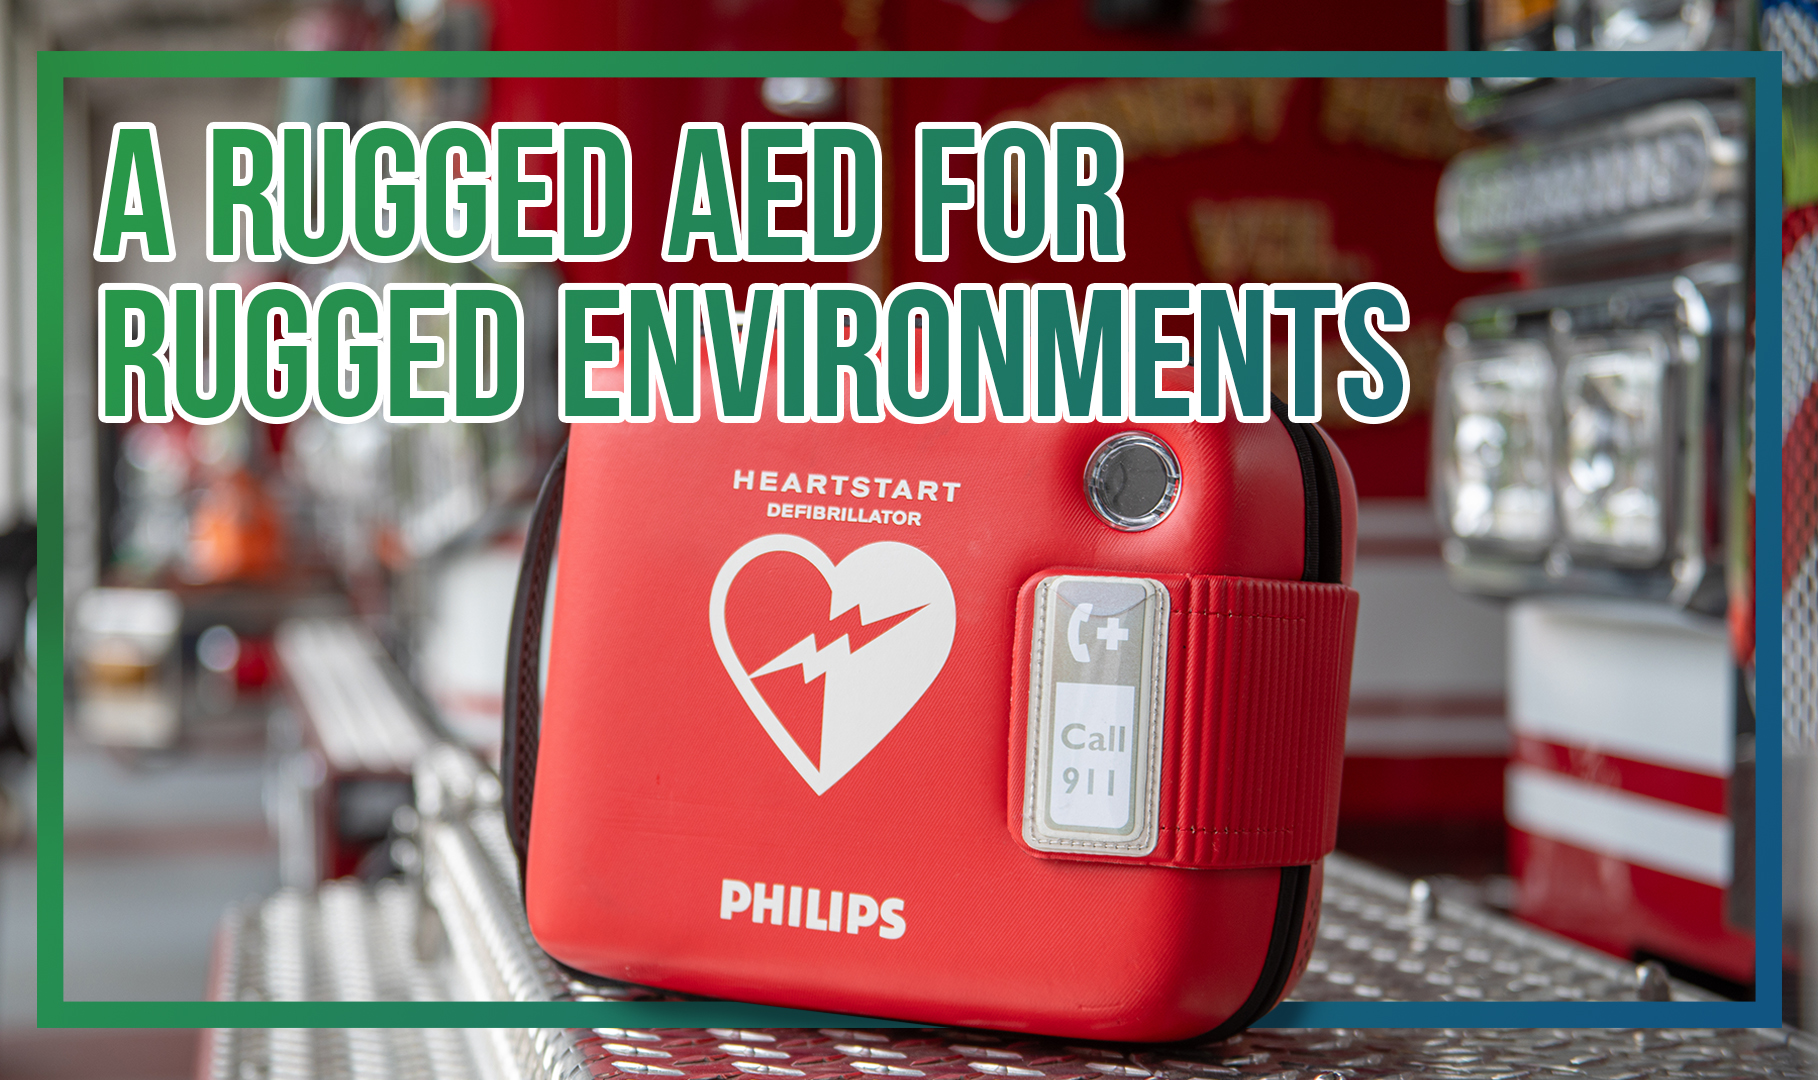 FRx Rugged Aed For Rugged Environment